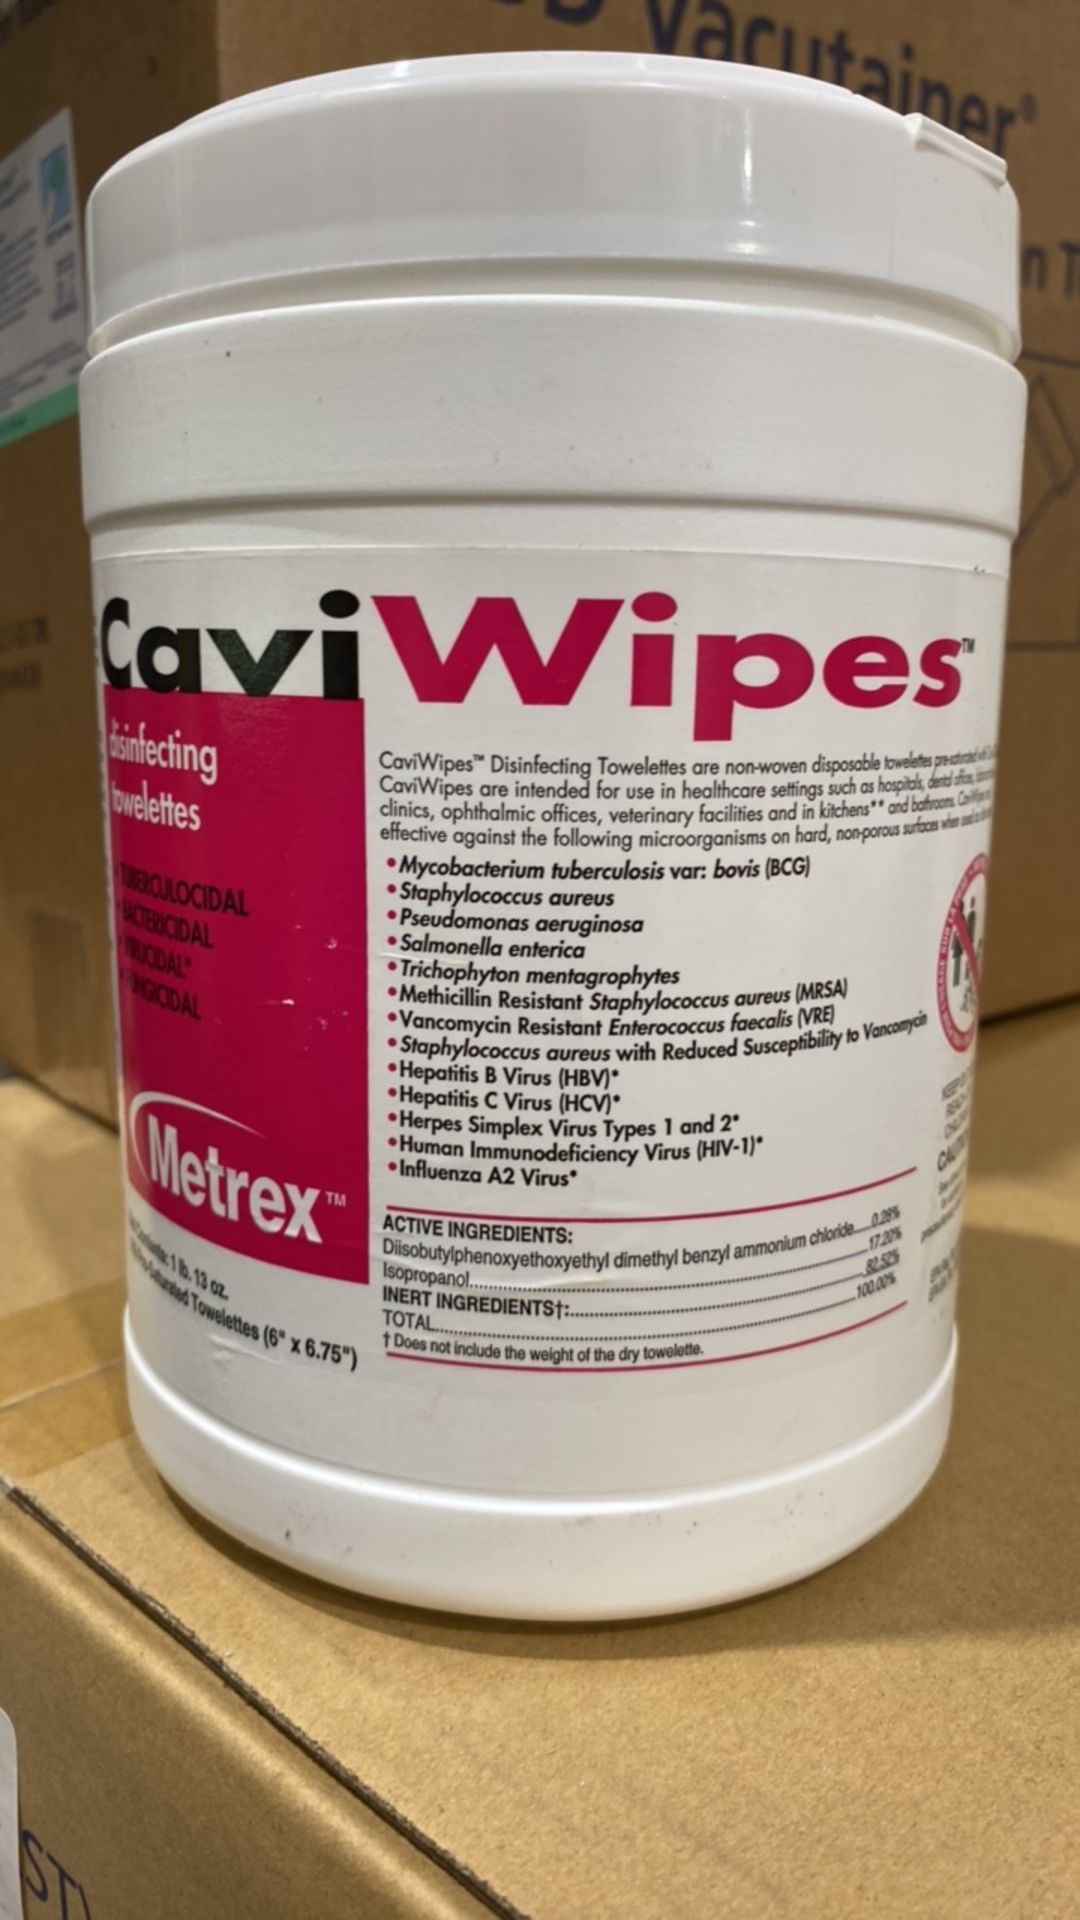 METREX CAVI WIPES 13-1100 DISINFECTING TOWELETTES (EXPIRED) QTY:PALLET (APPROXIMATELY 100)